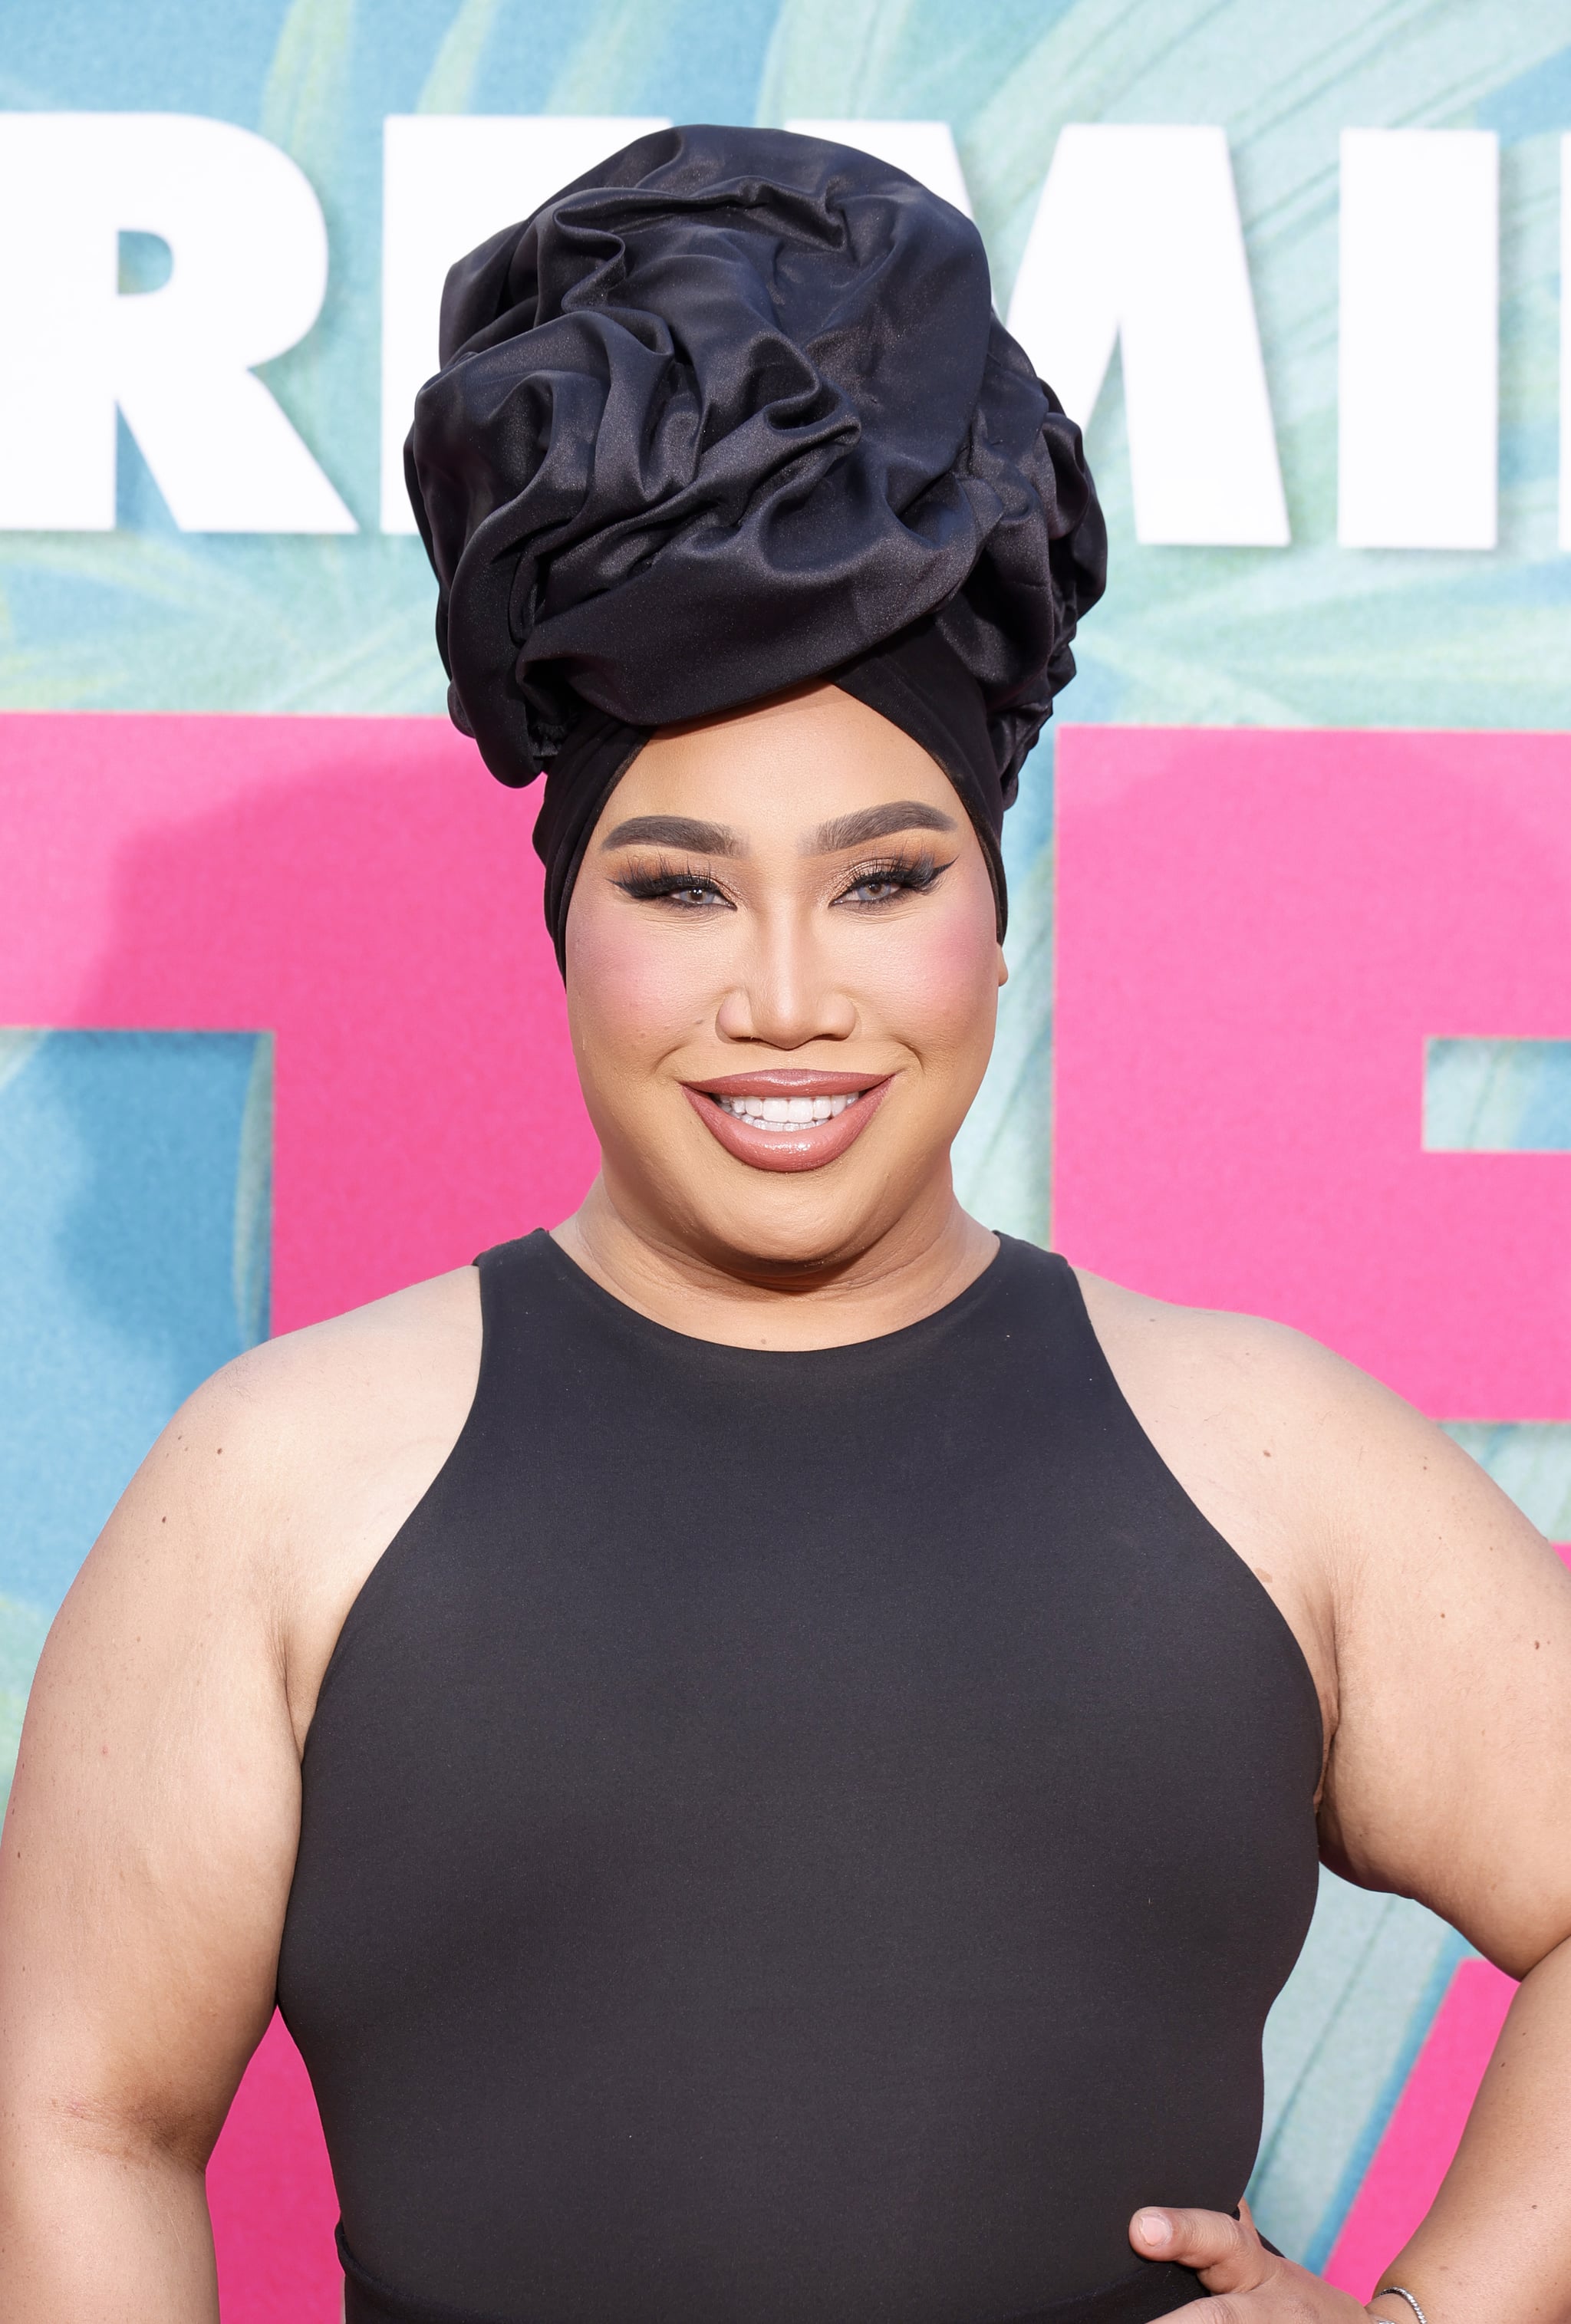 HOLLYWOOD, CALIFORNIA - AUGUST 02: Patrick Starrr attends the premiere of Universal Pictures' 